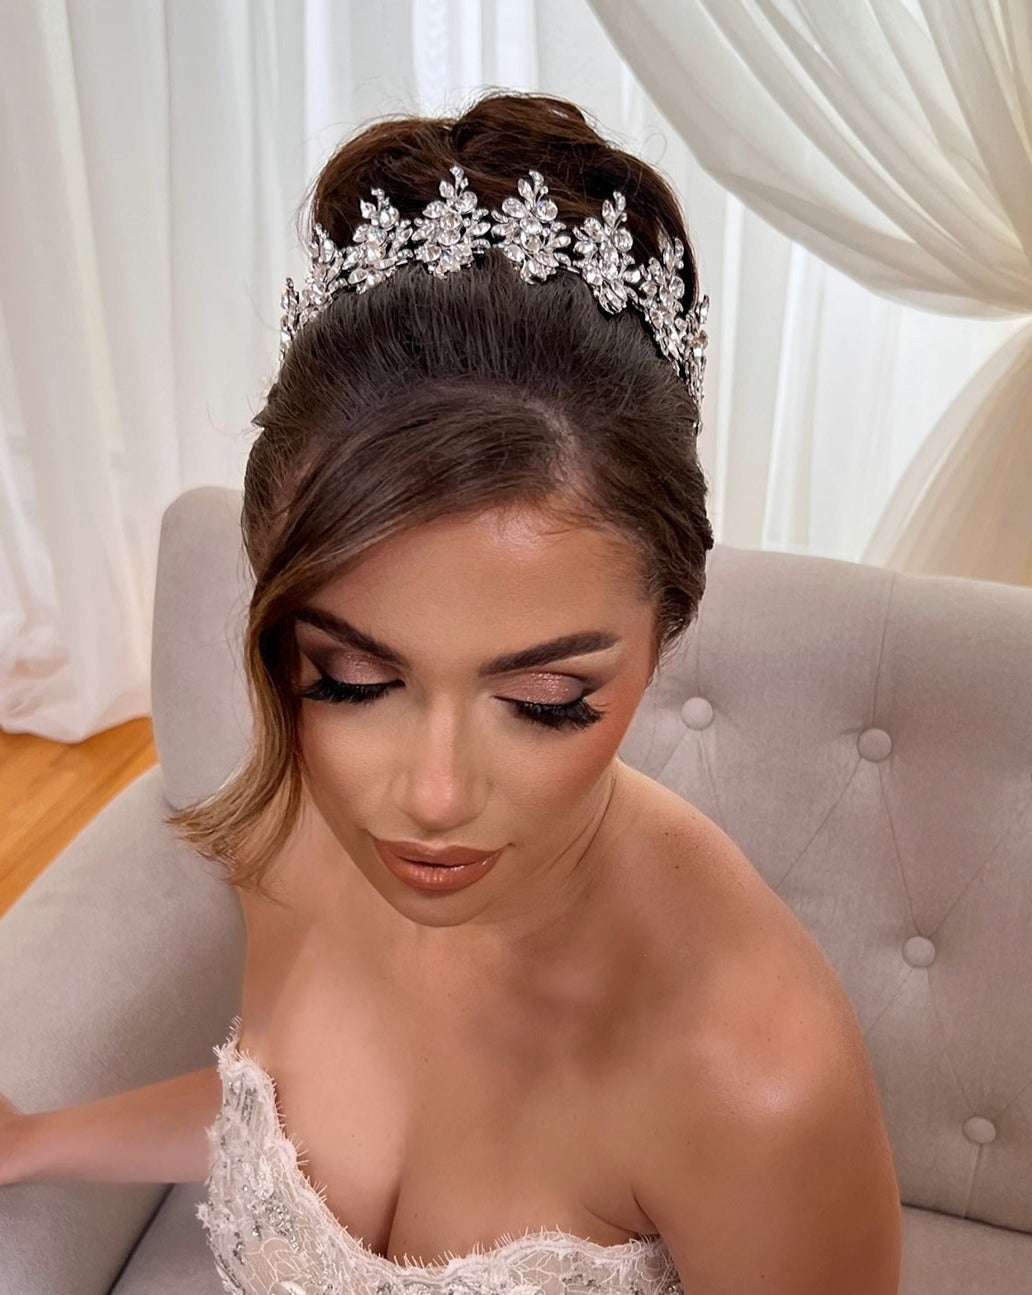 female model wearing pointed bridal headband with crystal floral details